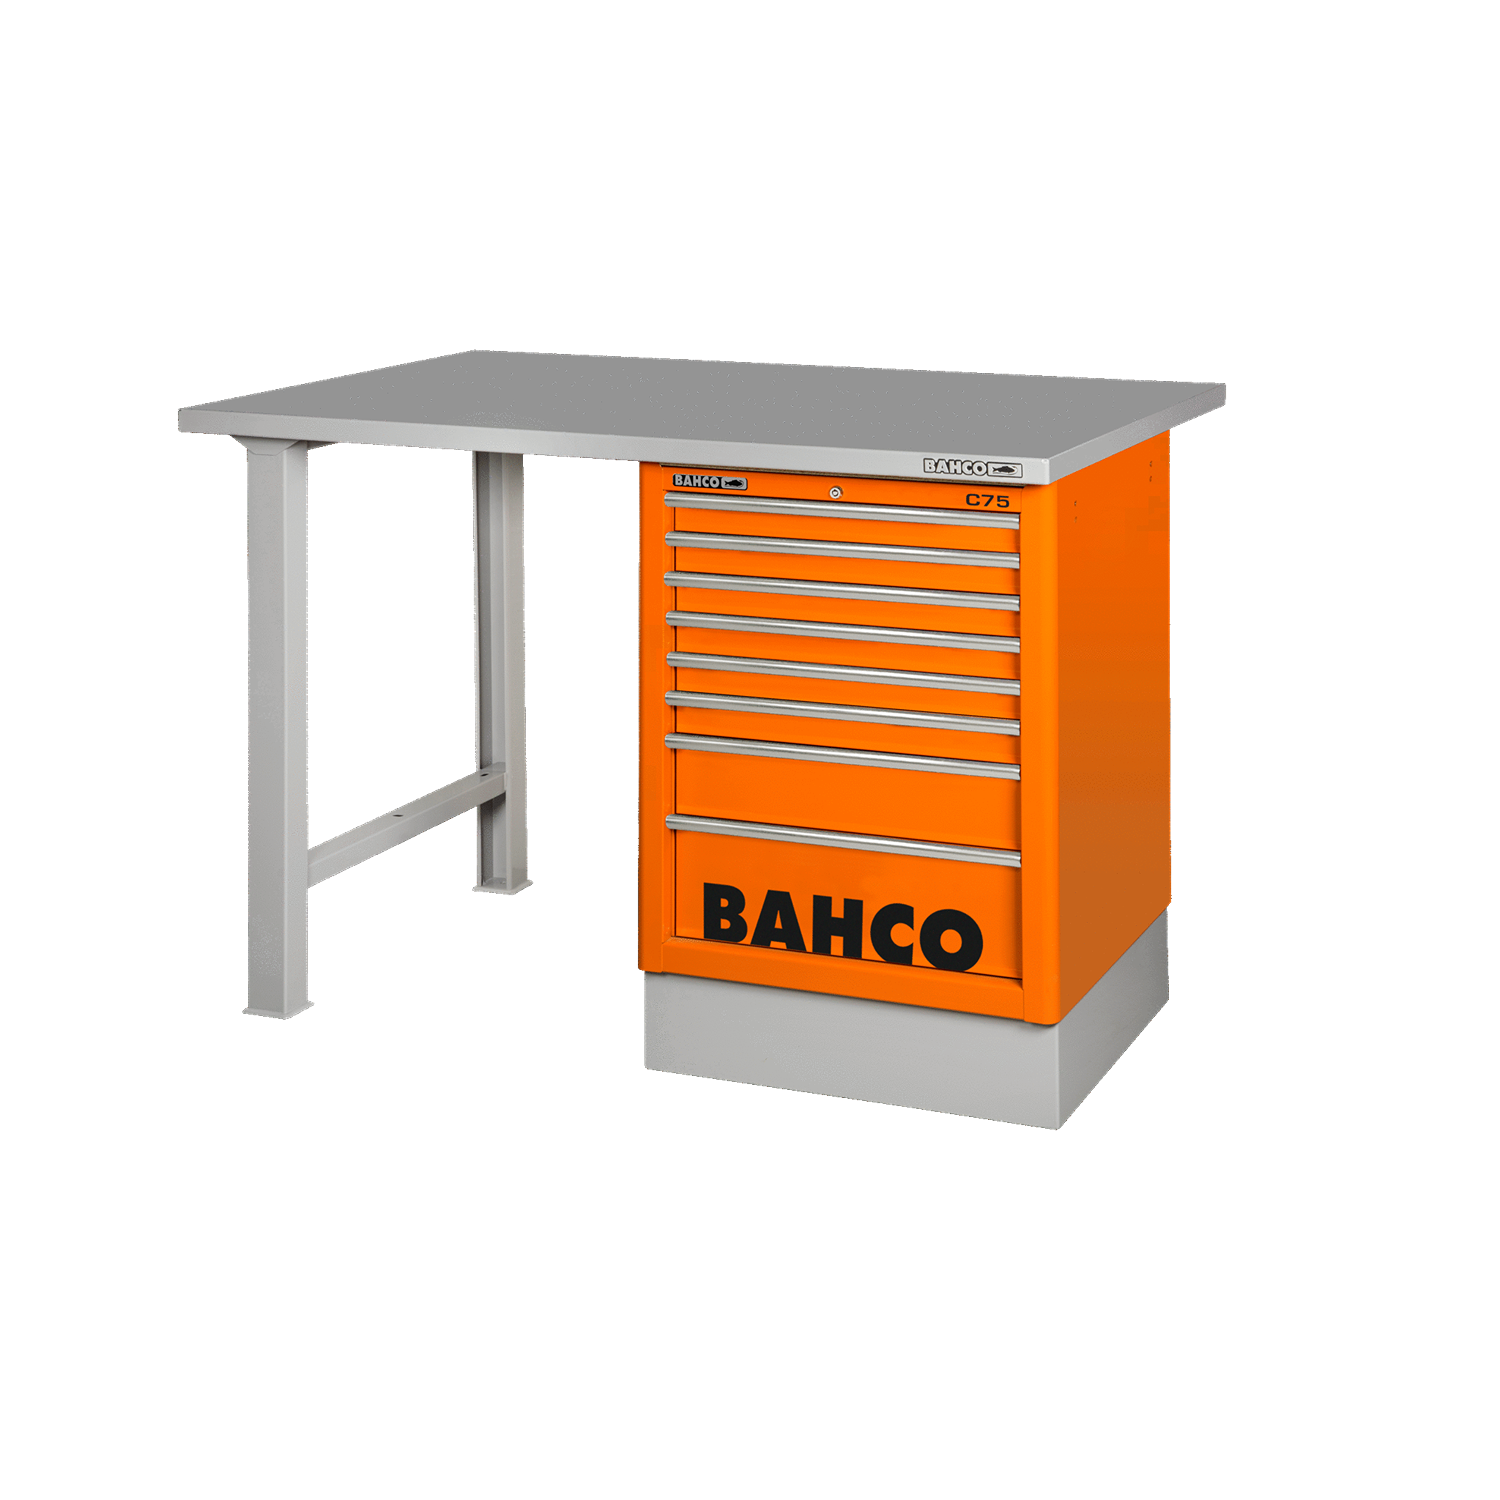 BAHCO 1495KCWB18TS Heavy Duty Steel Top Workbenches with Drawer - Premium Workbench from BAHCO - Shop now at Yew Aik.